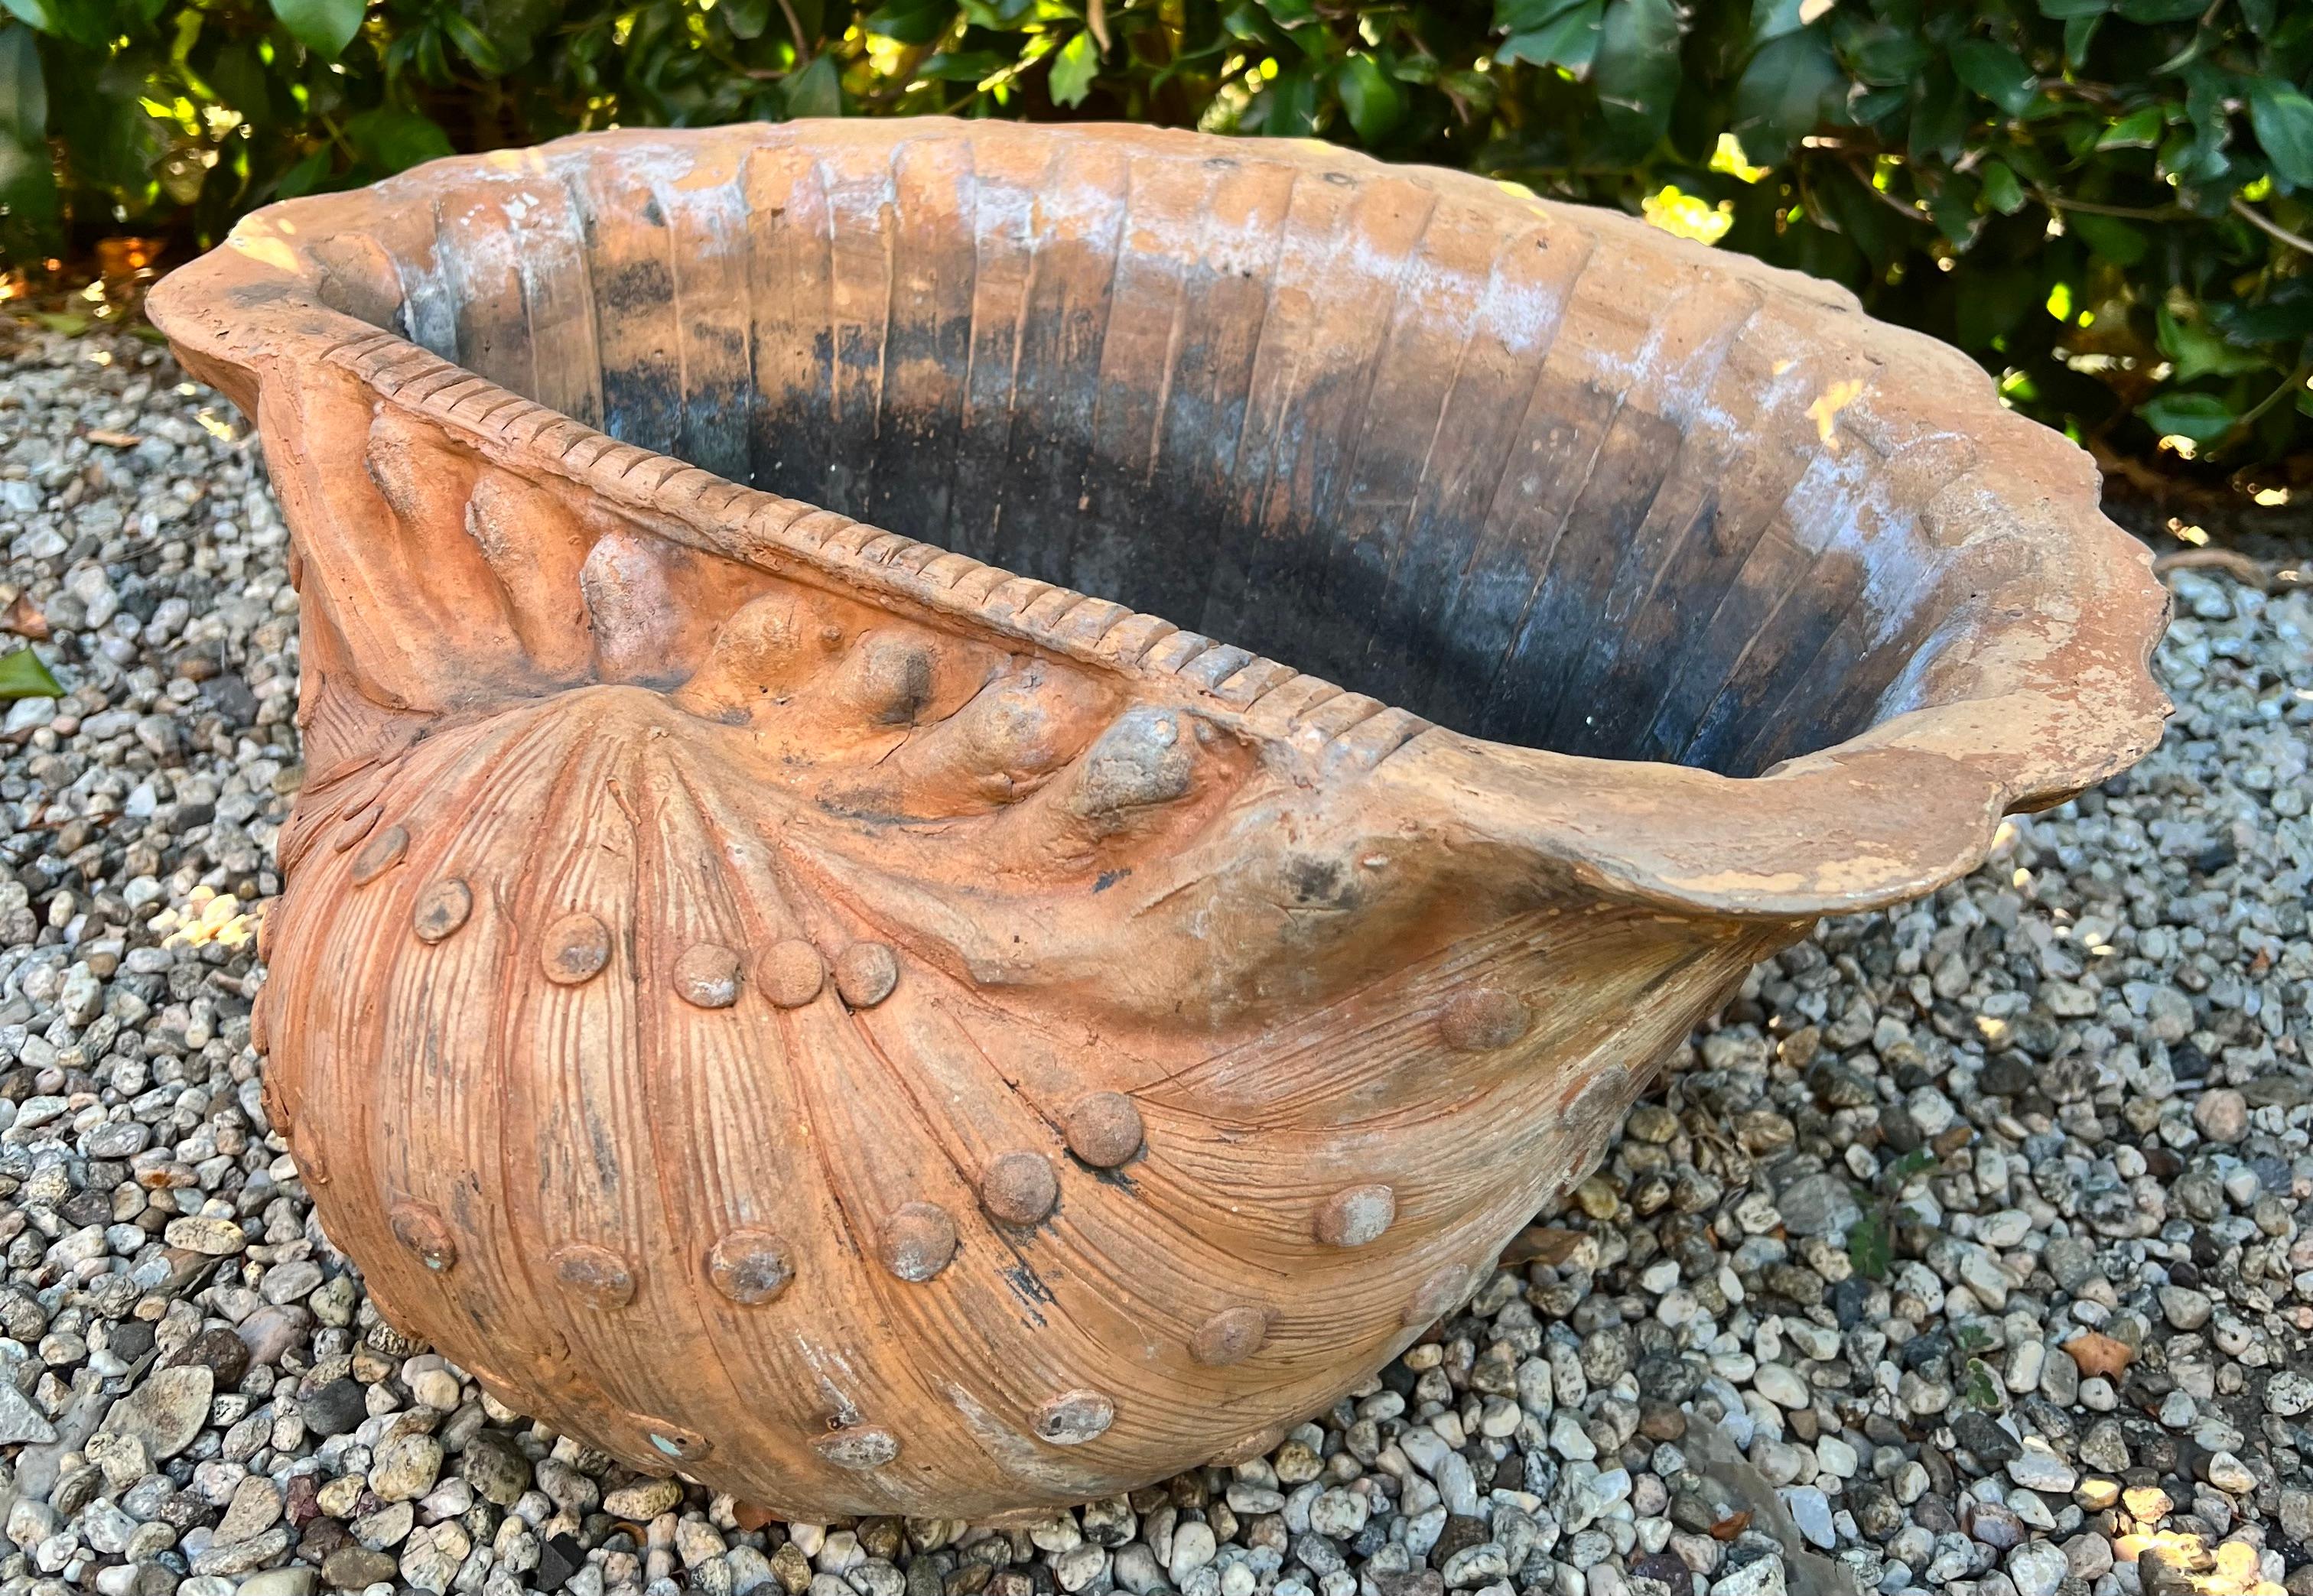 A beautifully designed Terracotta Planter or Jardiniere in the shape of a Shell or Conch Shell.

The perfect addition to any garden, garden room, patio or even doors as a centerpieces of planter.  The design is lovely with a shell motif with 3-D